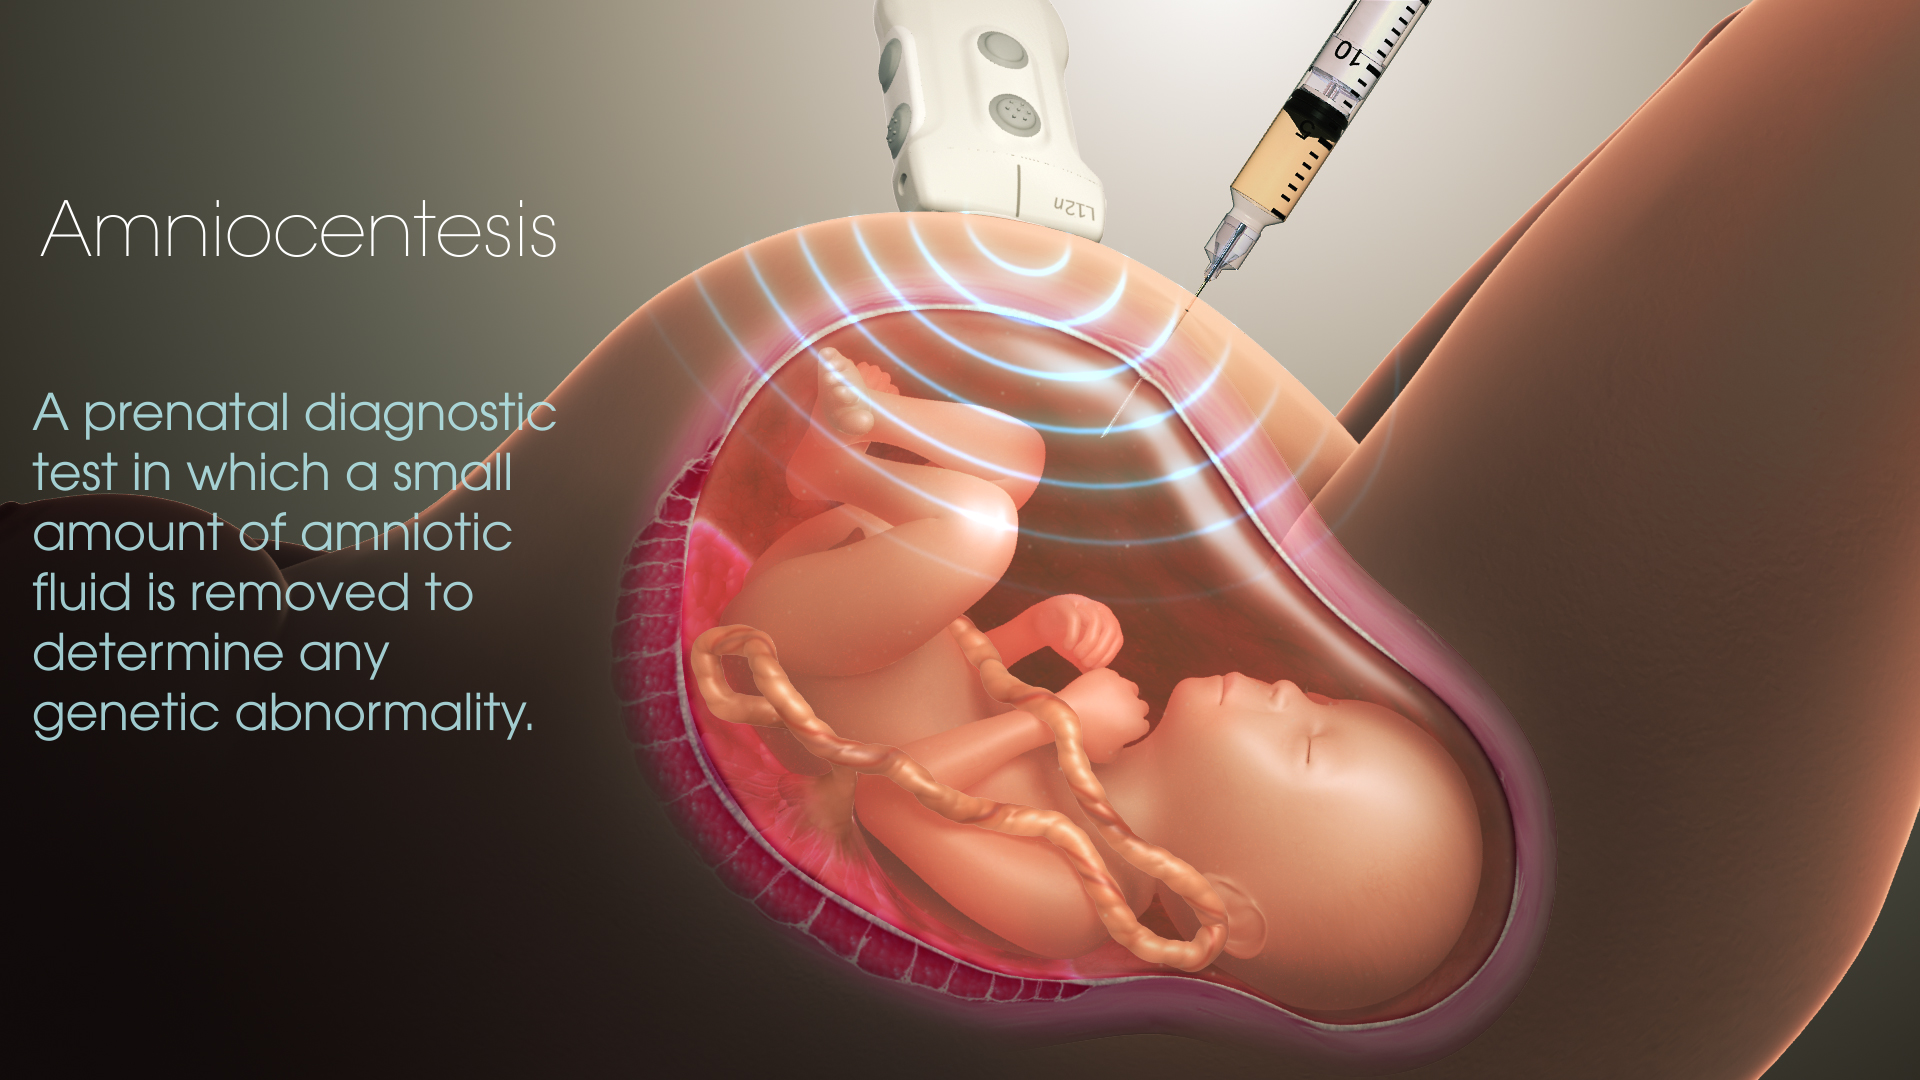 What is an Amniocentesis? - Scientific Animations